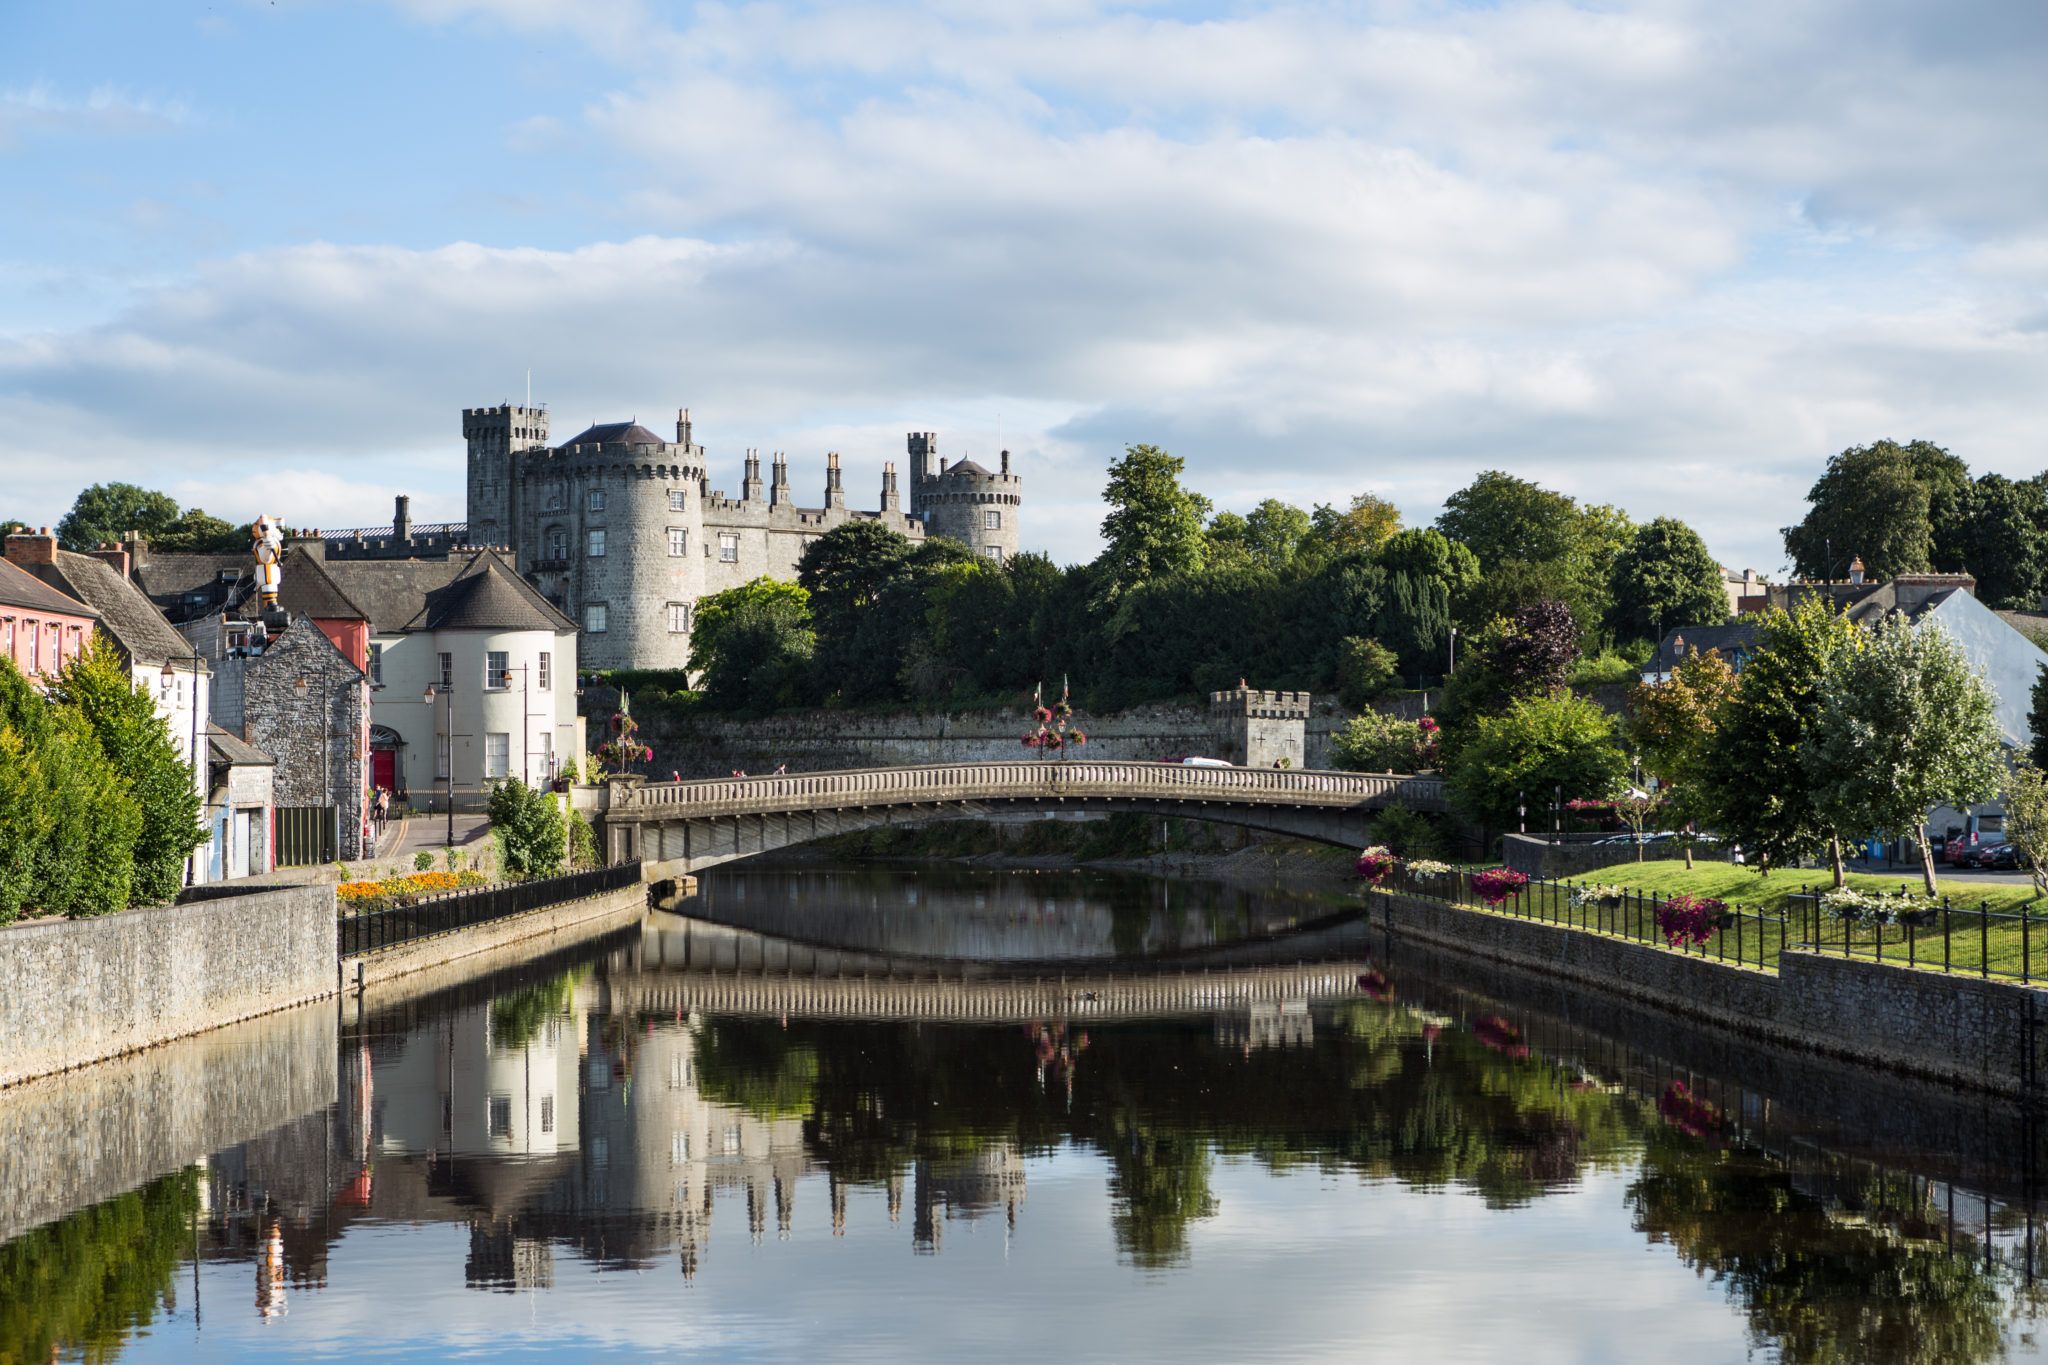 Not Your Average Staycation: There’s nothing average about Kilkenny